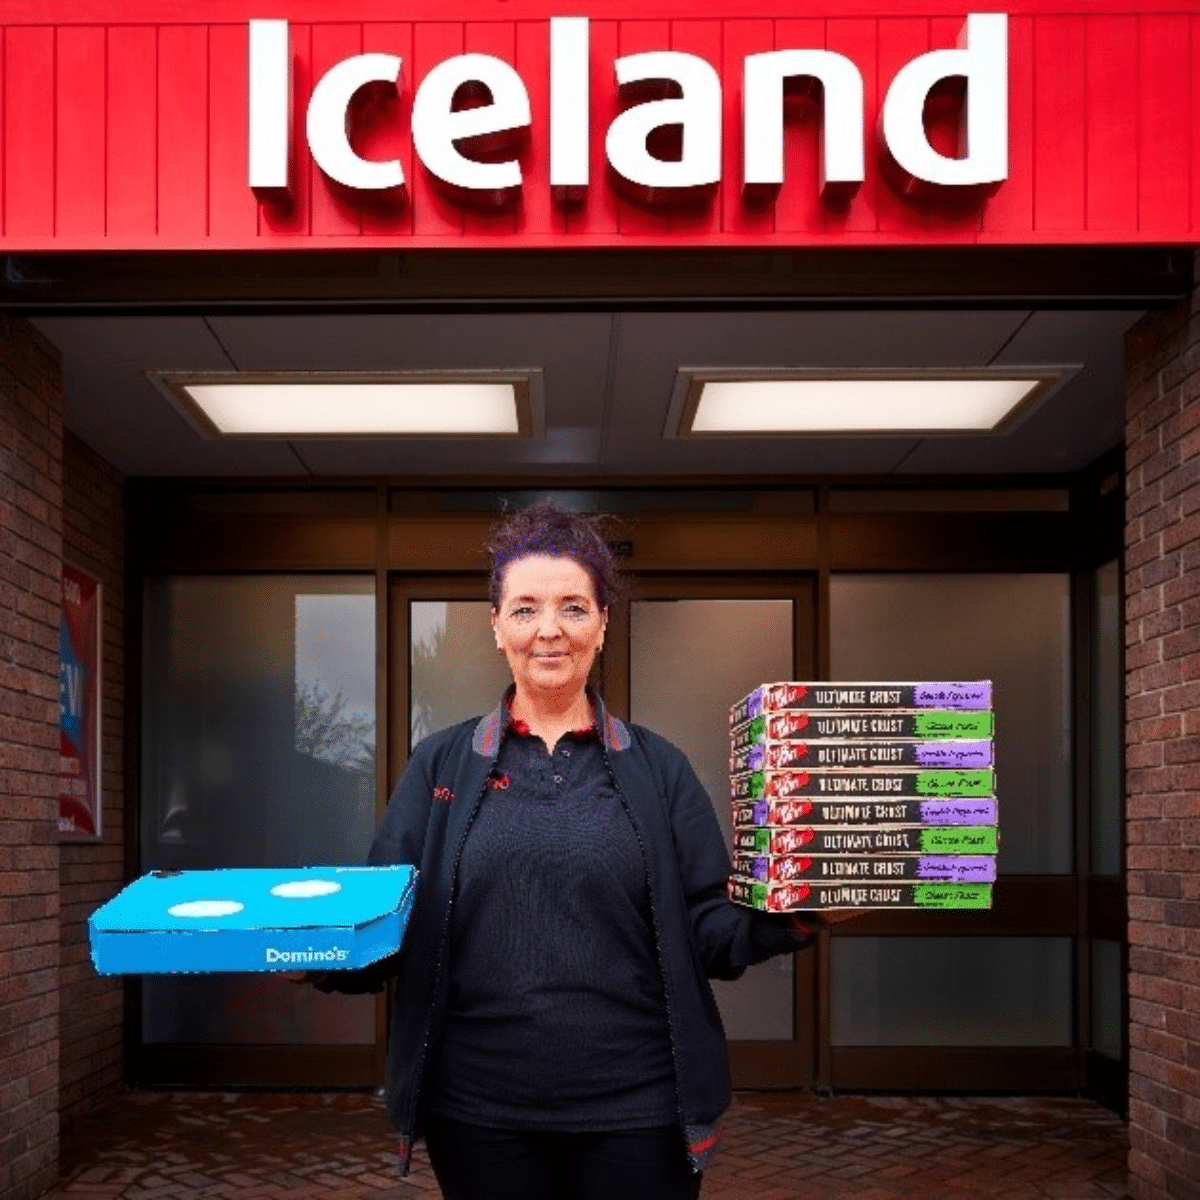 A person stands outside a store in Iceland. In his right hand he holds a Domino's pizza box. They are holding eight stacks of Icelandic pizza in their left hands.